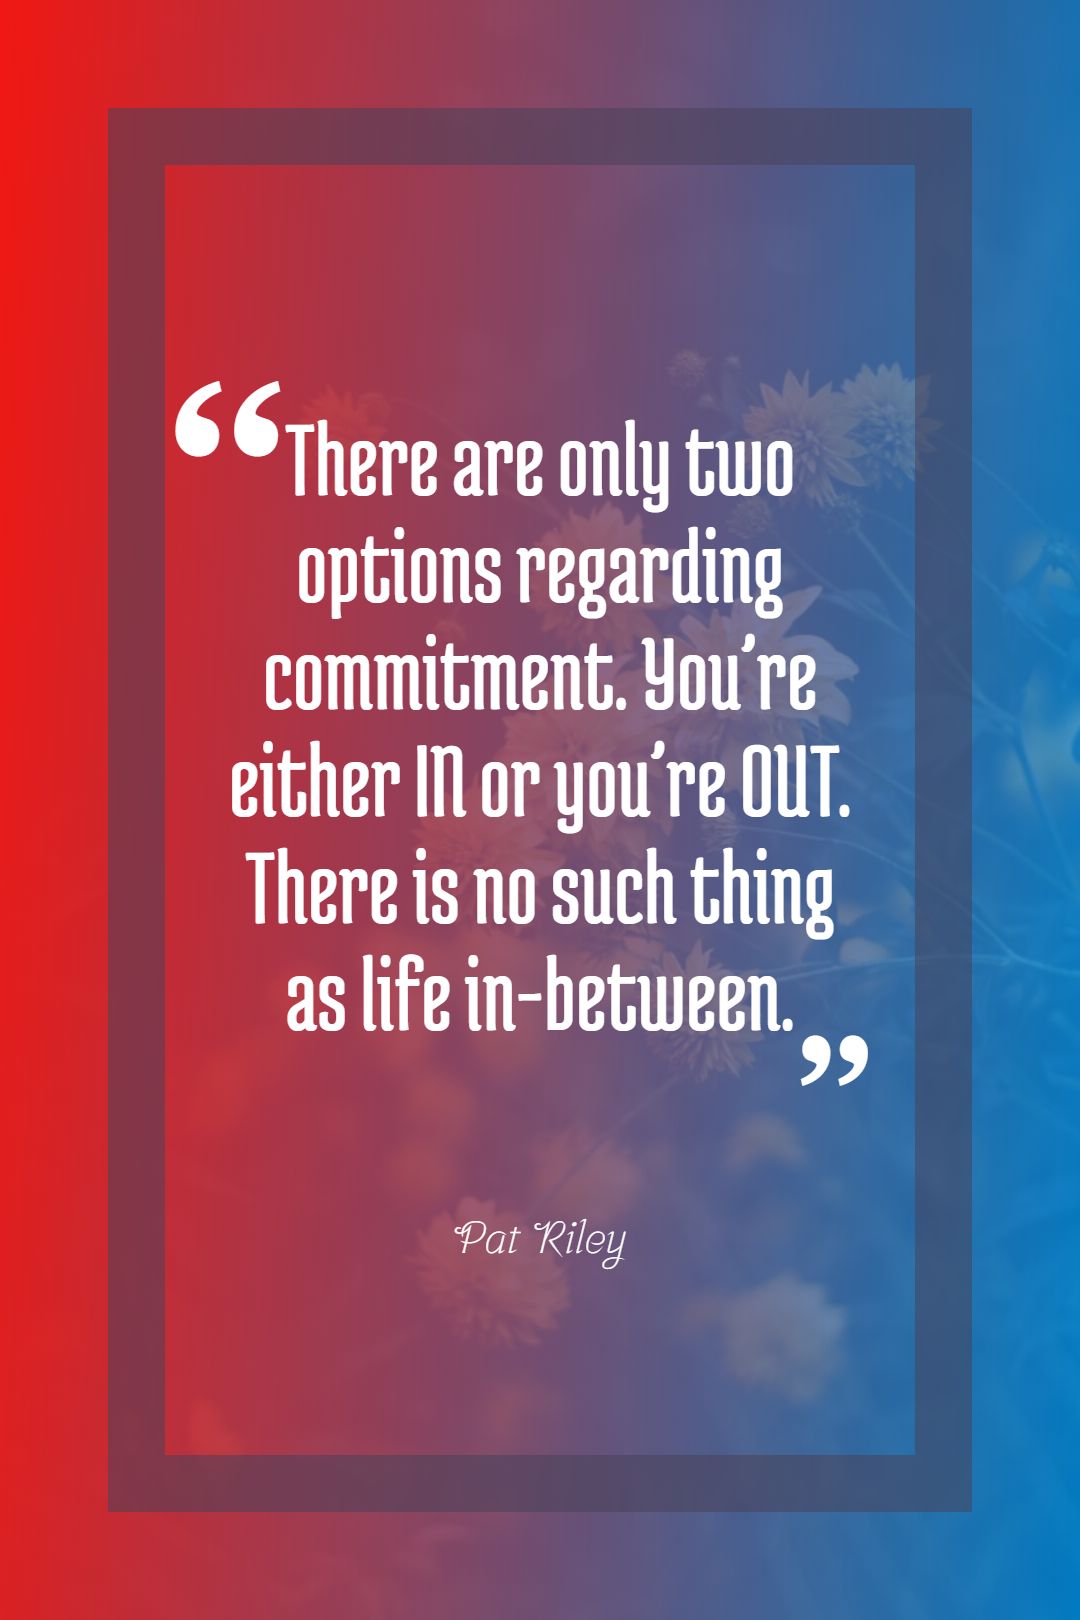 There are only two options regarding commitment. You’re either IN or you’re OUT. There is no such thing as life in between.